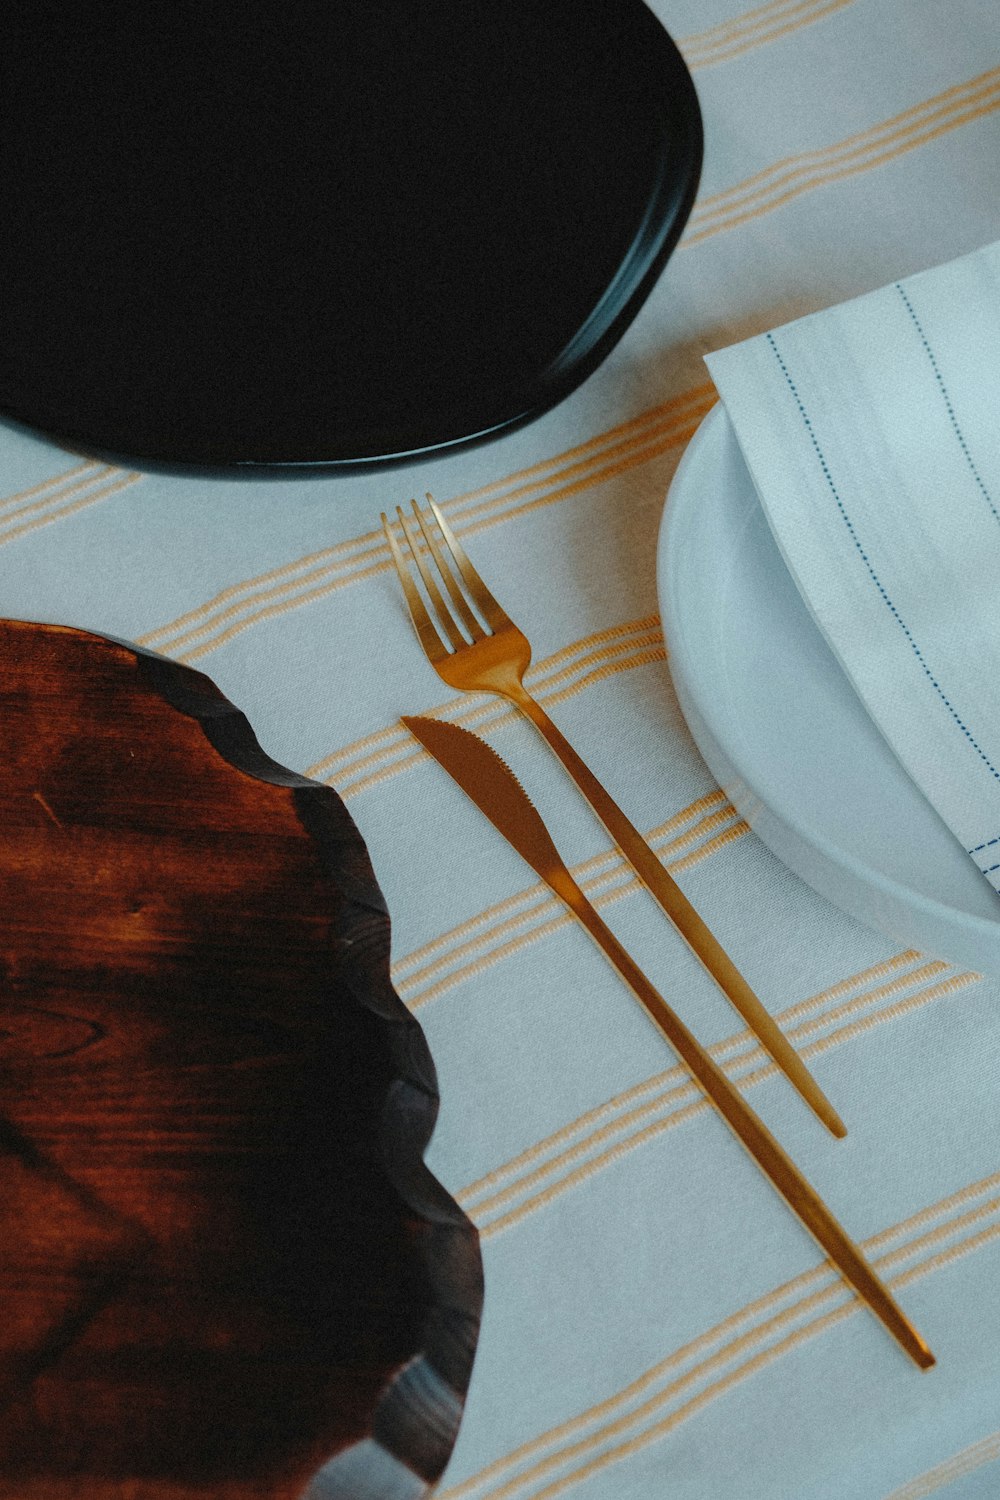 a close up of a table with a plate and a fork